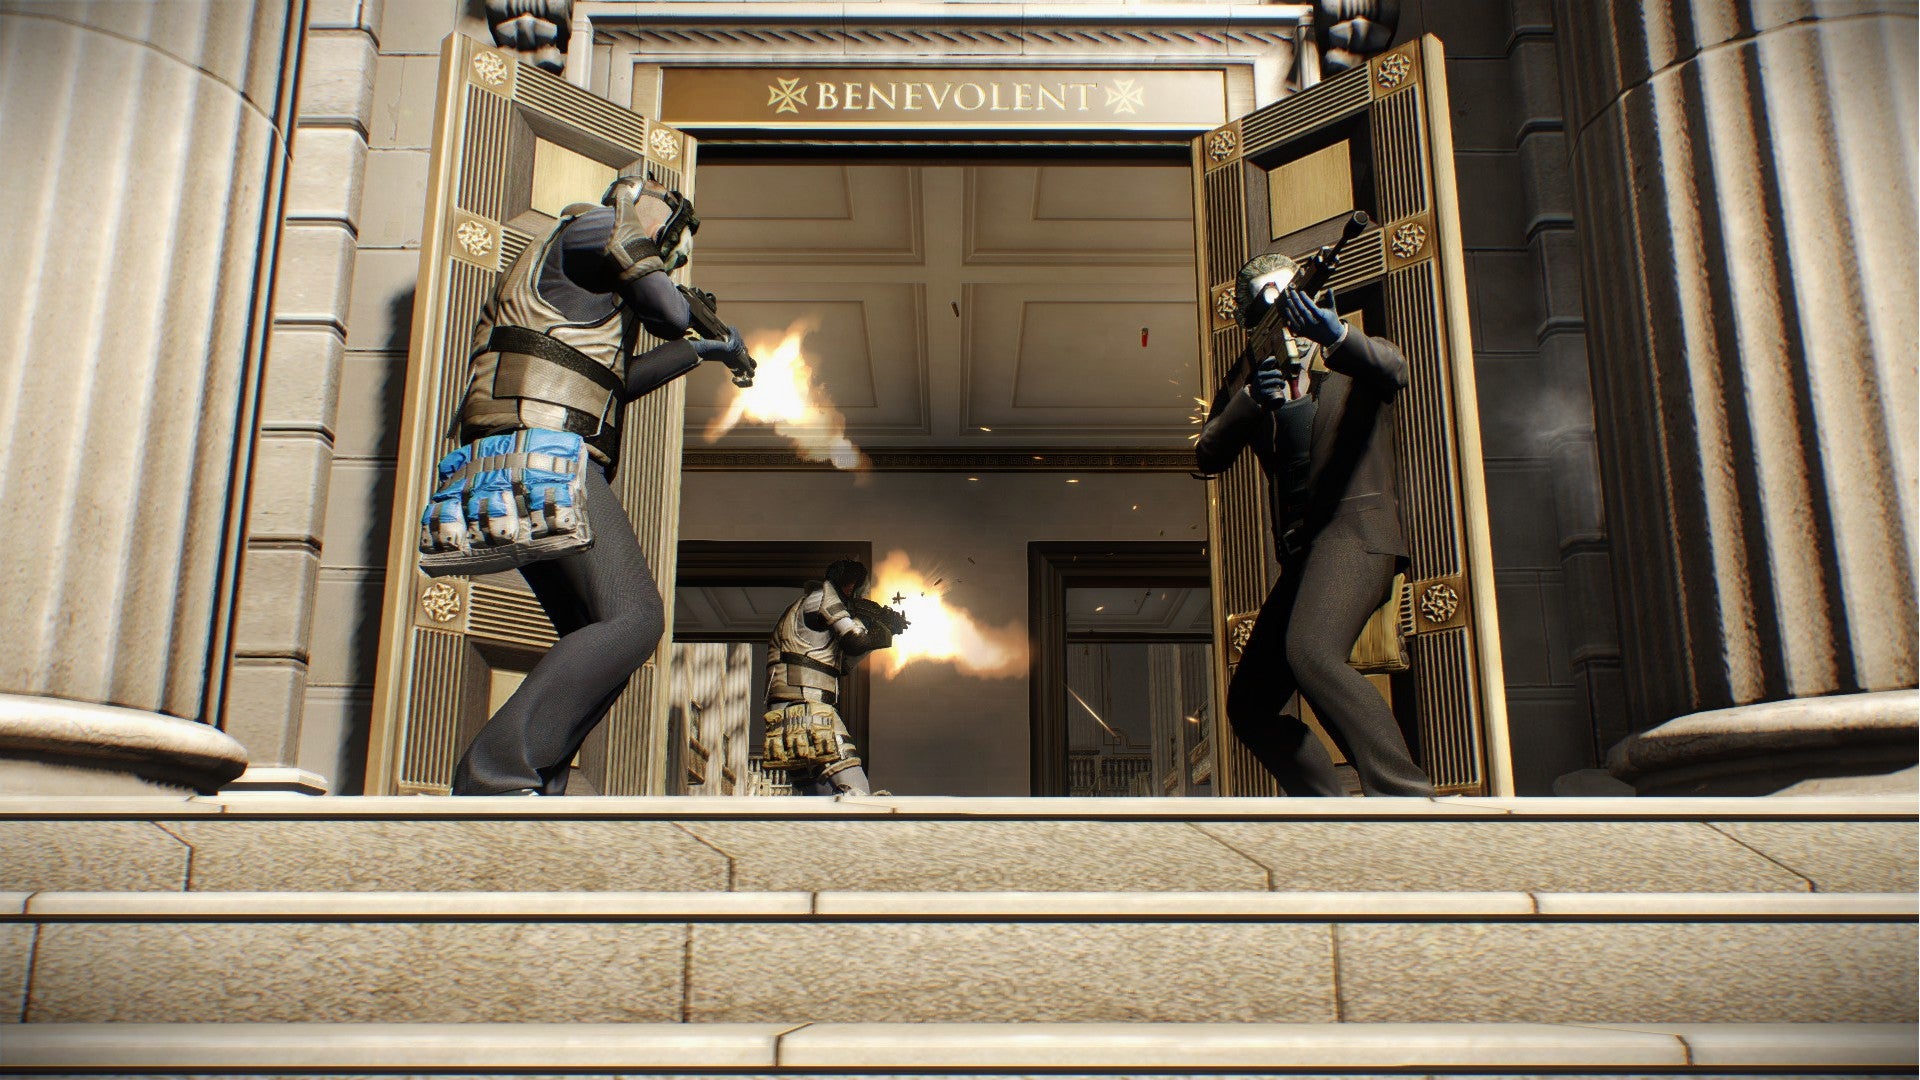 Payday 2 image showing three bank robbers aiming their guns at the entrance to a big bank, with one aiming outside at the others firing into the building.